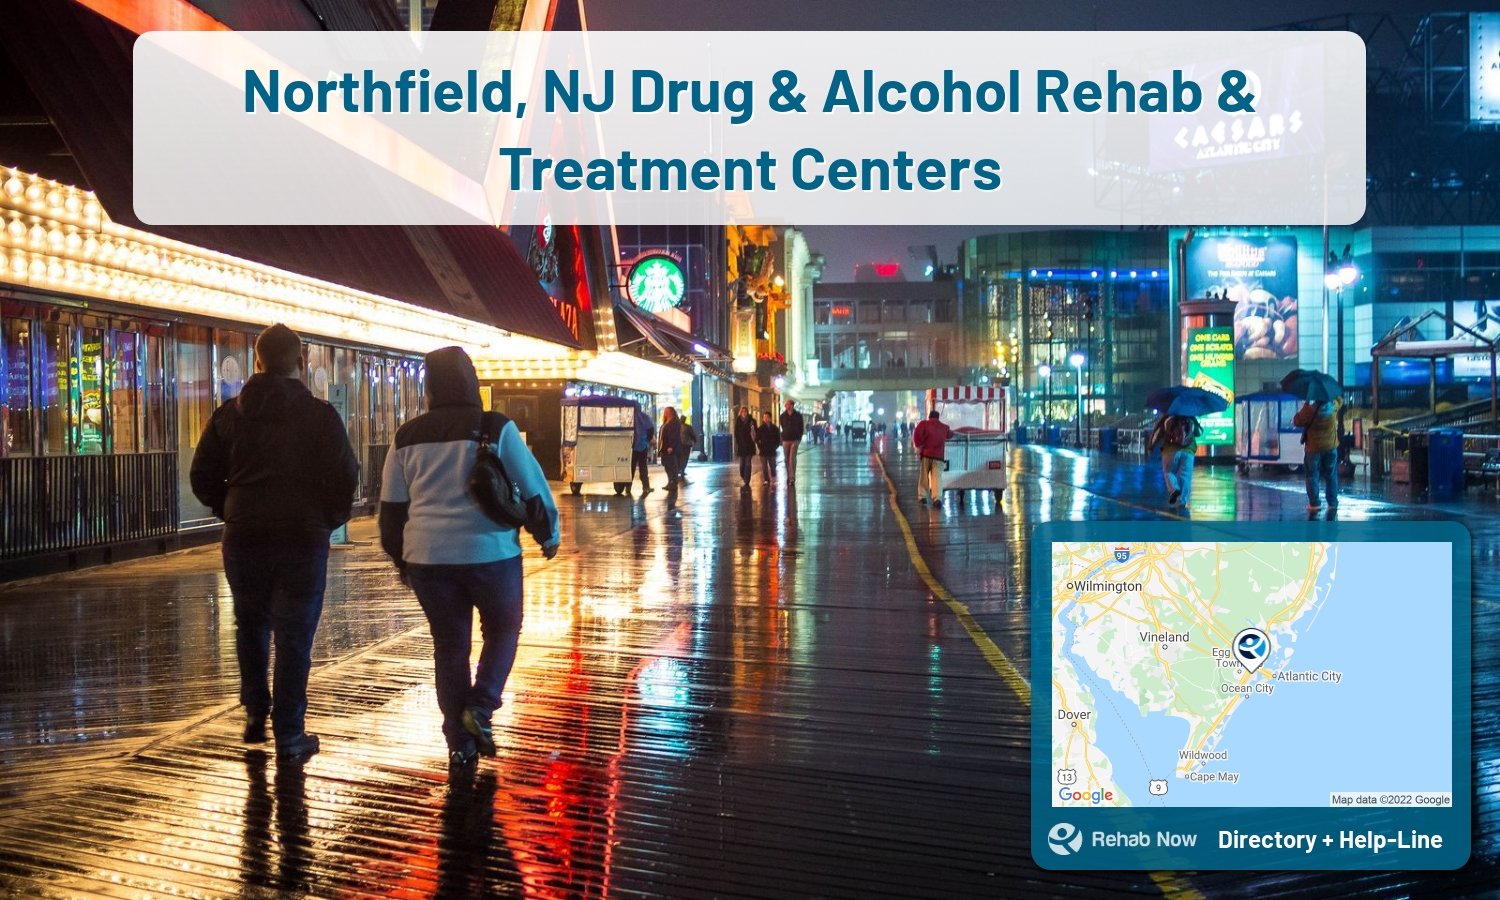 Our experts can help you find treatment now in Northfield, New Jersey. We list drug rehab and alcohol centers in New Jersey.